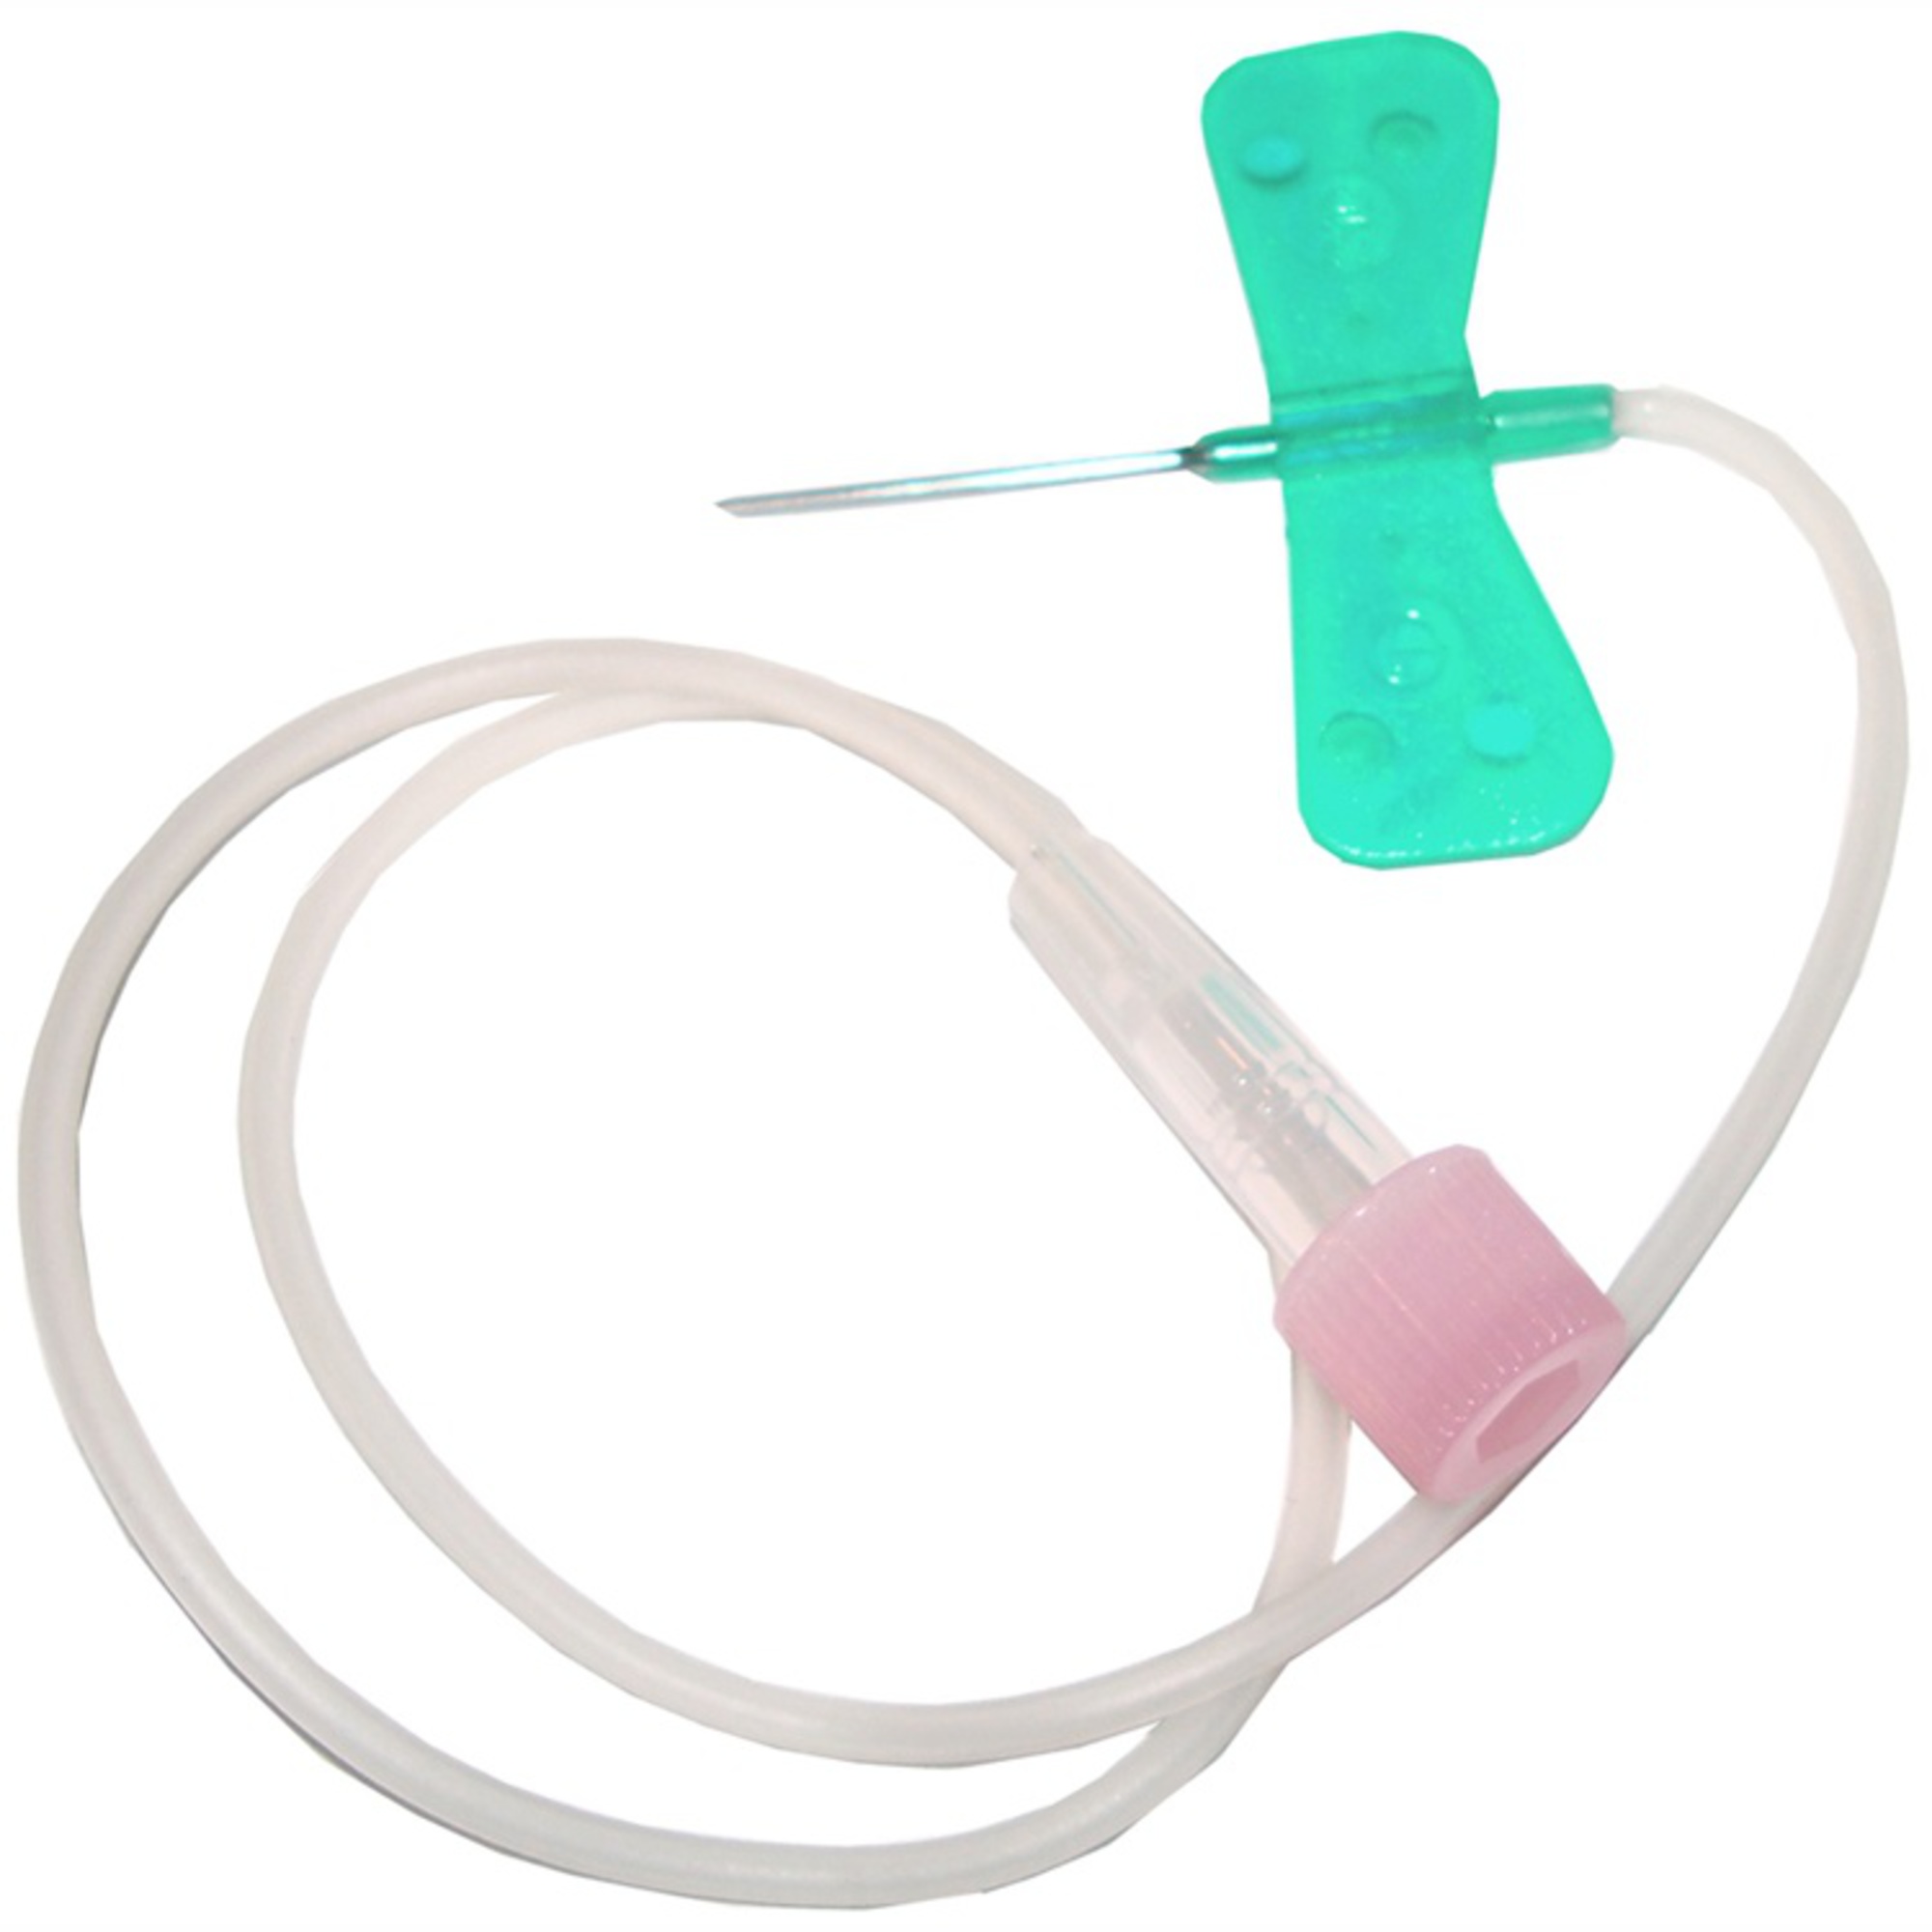 TERUMO SURFLO® WINGED INFUSION SETS SCALPVEIN SETS (BUTTERFLY NEEDLES) /  SHORT TUBE  Medical Supplies, Doctor Supplies, Healthcare Supplies,  Medical Equipment Supplies Sydney, Melbourne, Brisbane, Perth, Adelaide,  Hobart - Yes Medical Supplies